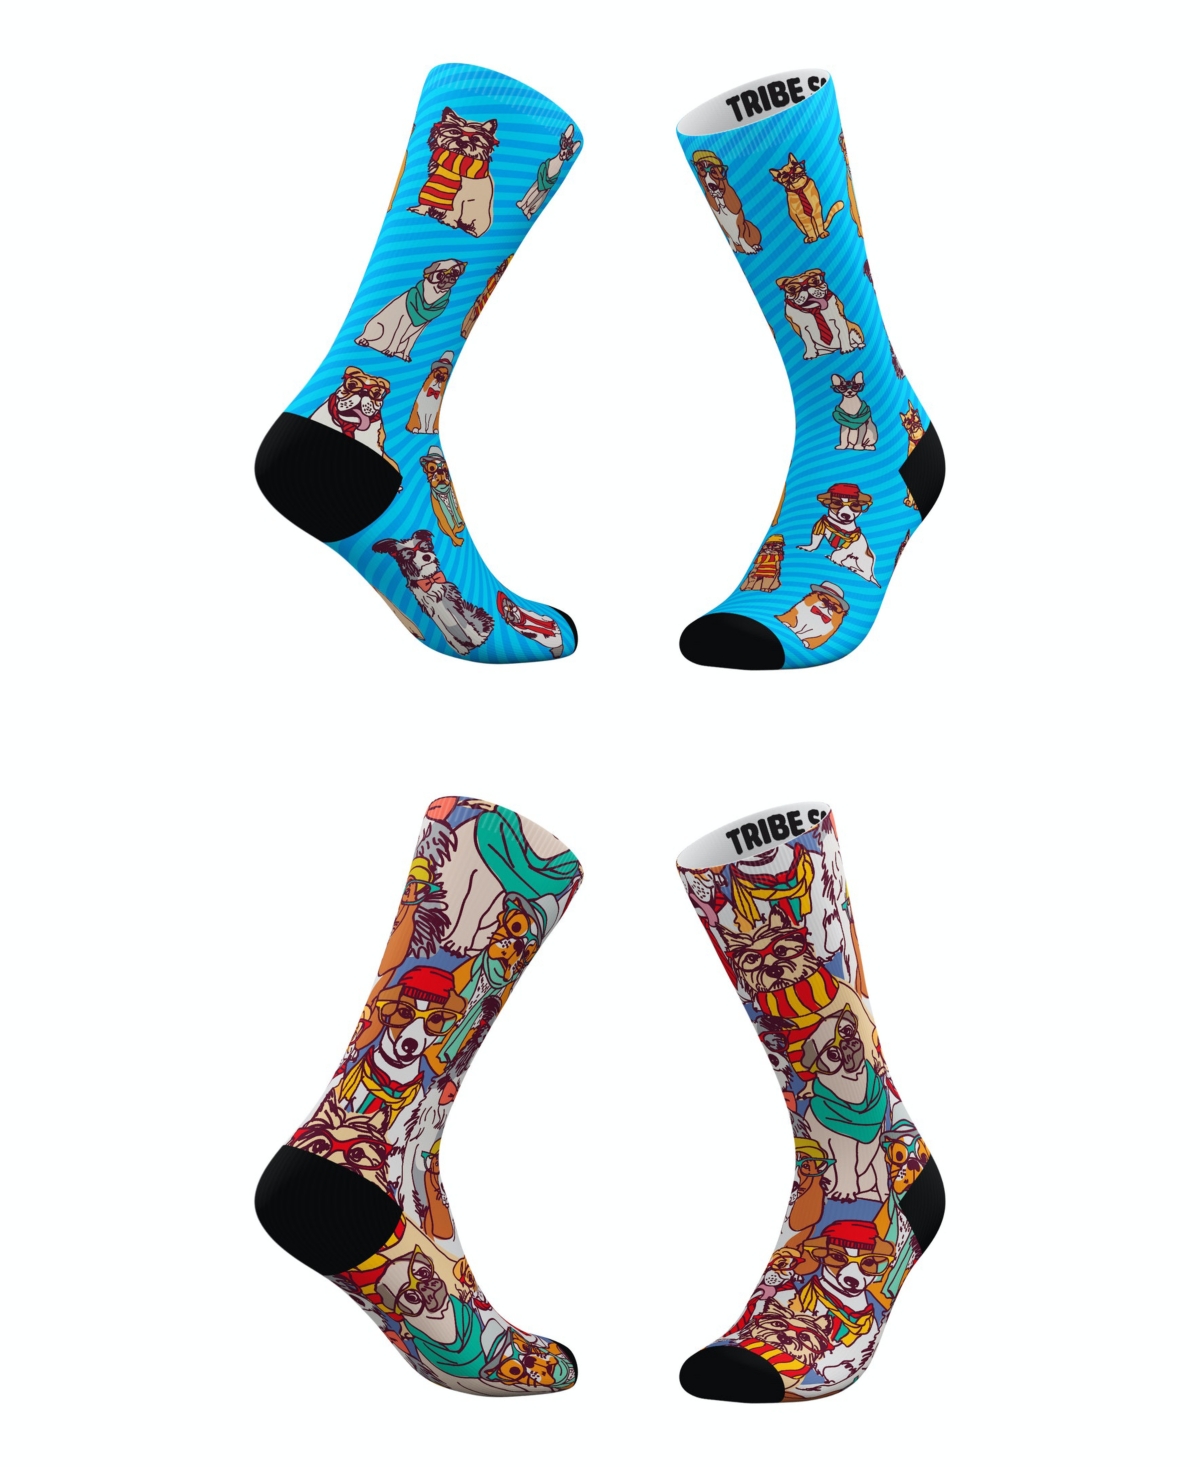 Men's and Women's Hipster Dog Socks, Set of 2 - Assorted Pre-Pack